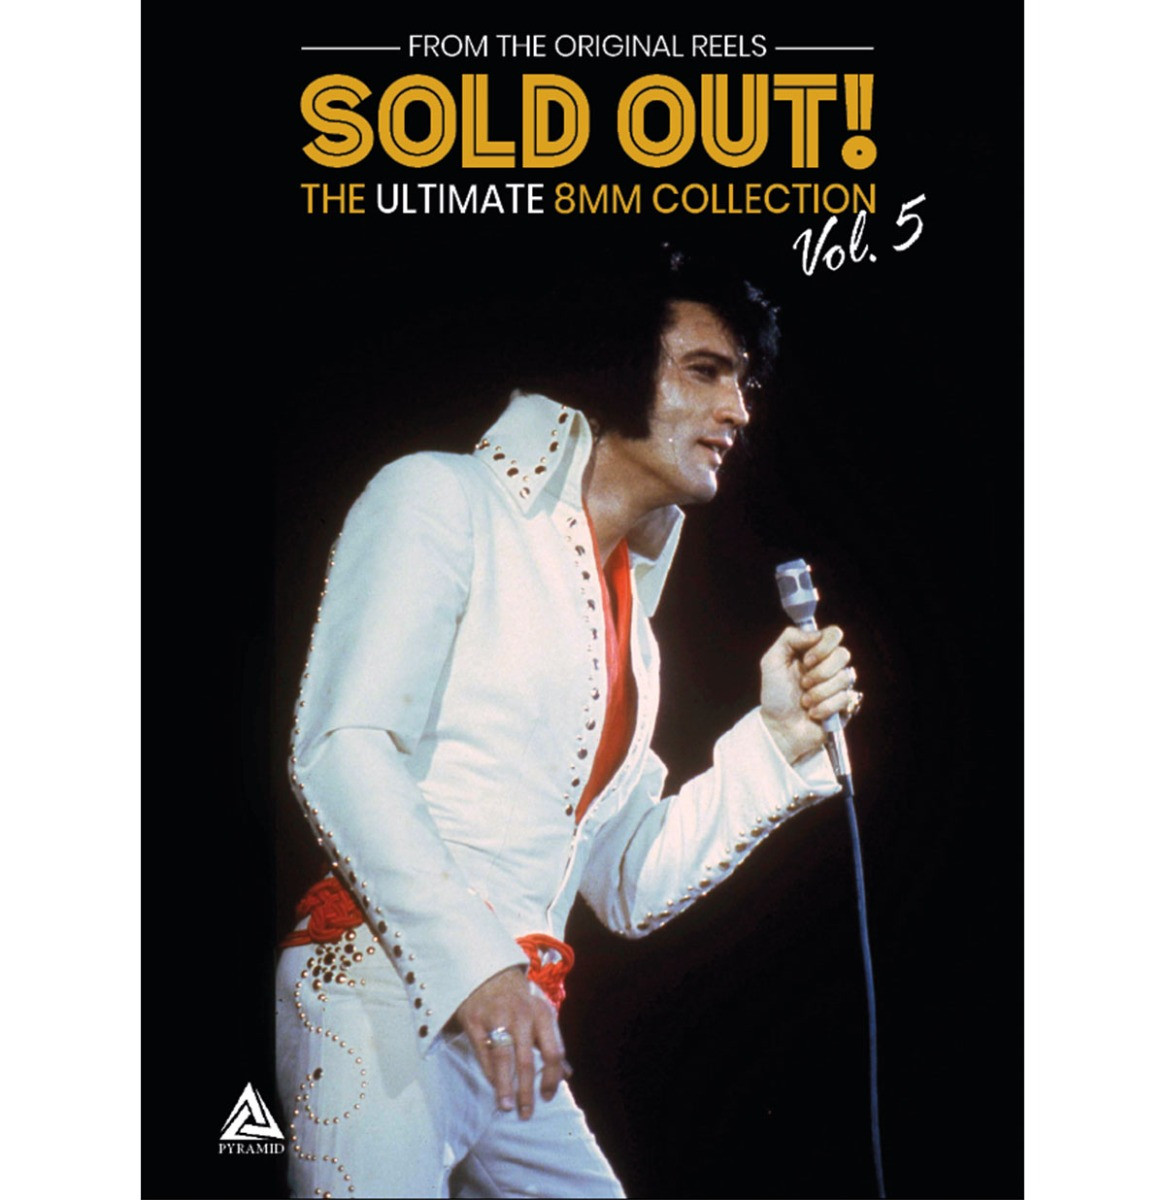 Elvis Presley: Sold Out! The Ultimate 8MM Collection Vol. 5 - 2 DVD Set